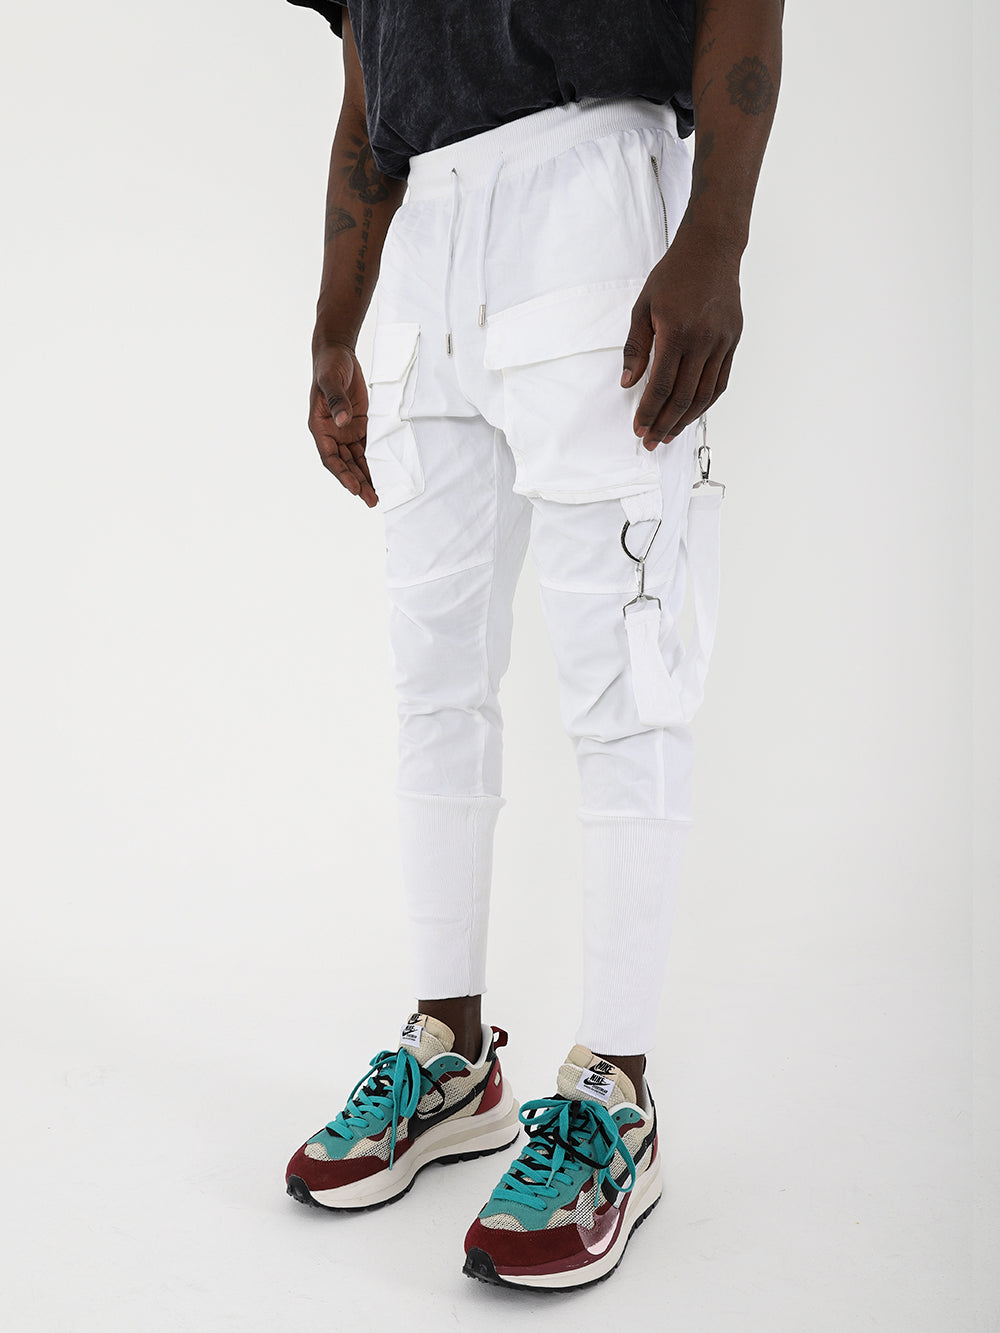 A slim fit Brooklyn jogger sporting white cargo pants and sneakers with an adjustable drawstring waist.